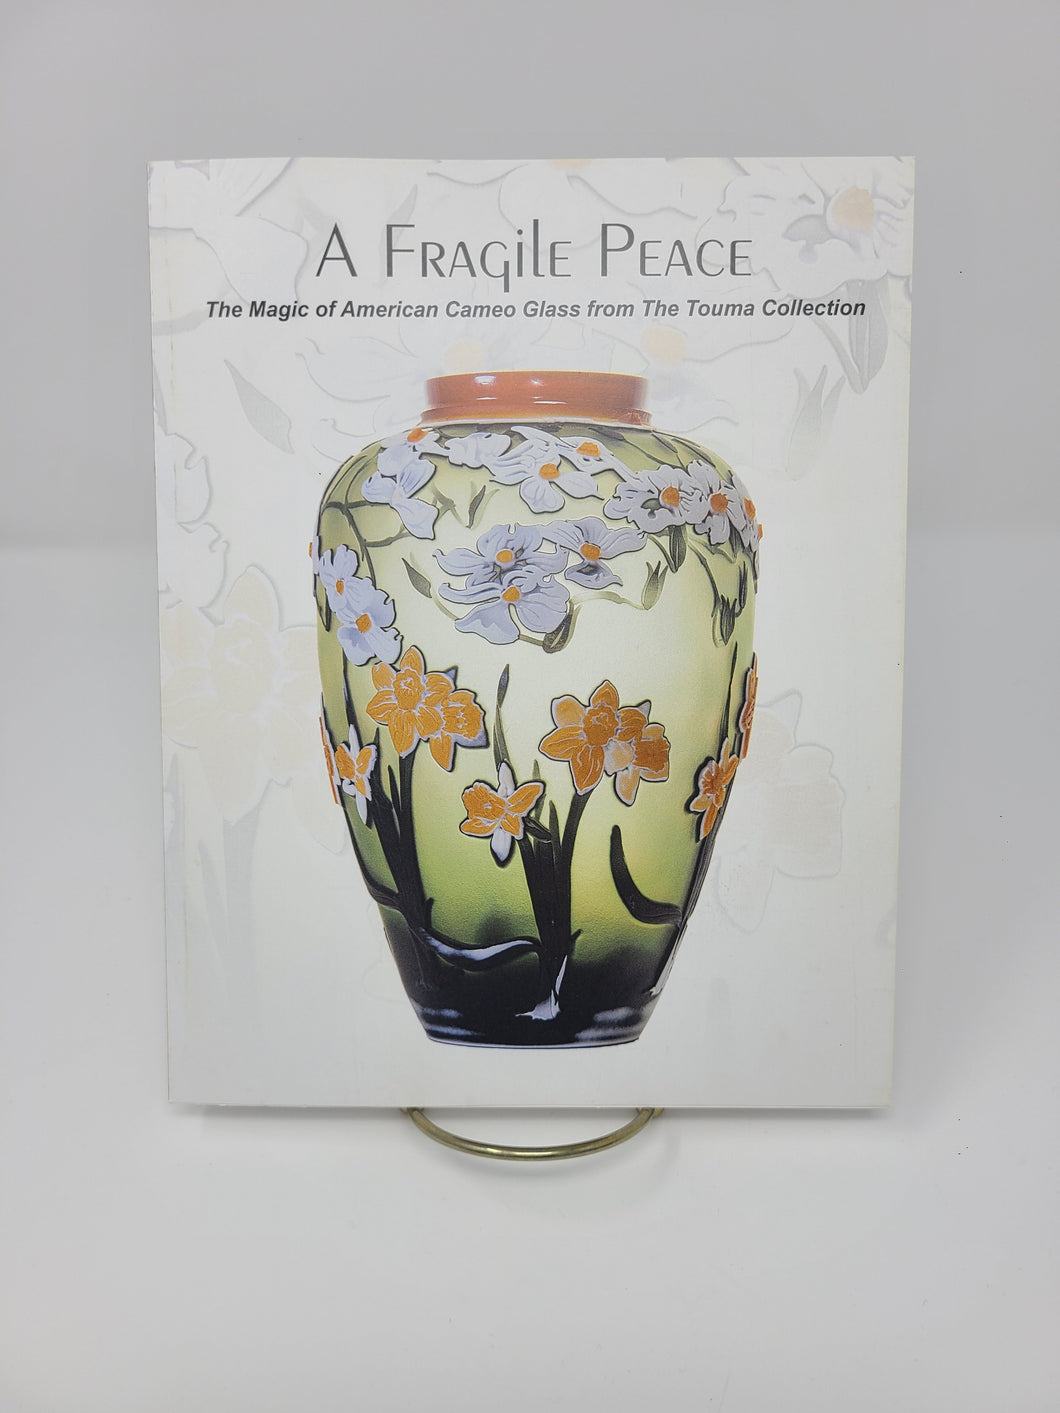 A Fragile Peace: The Magic of American Cameo Glass from The Touma Collection